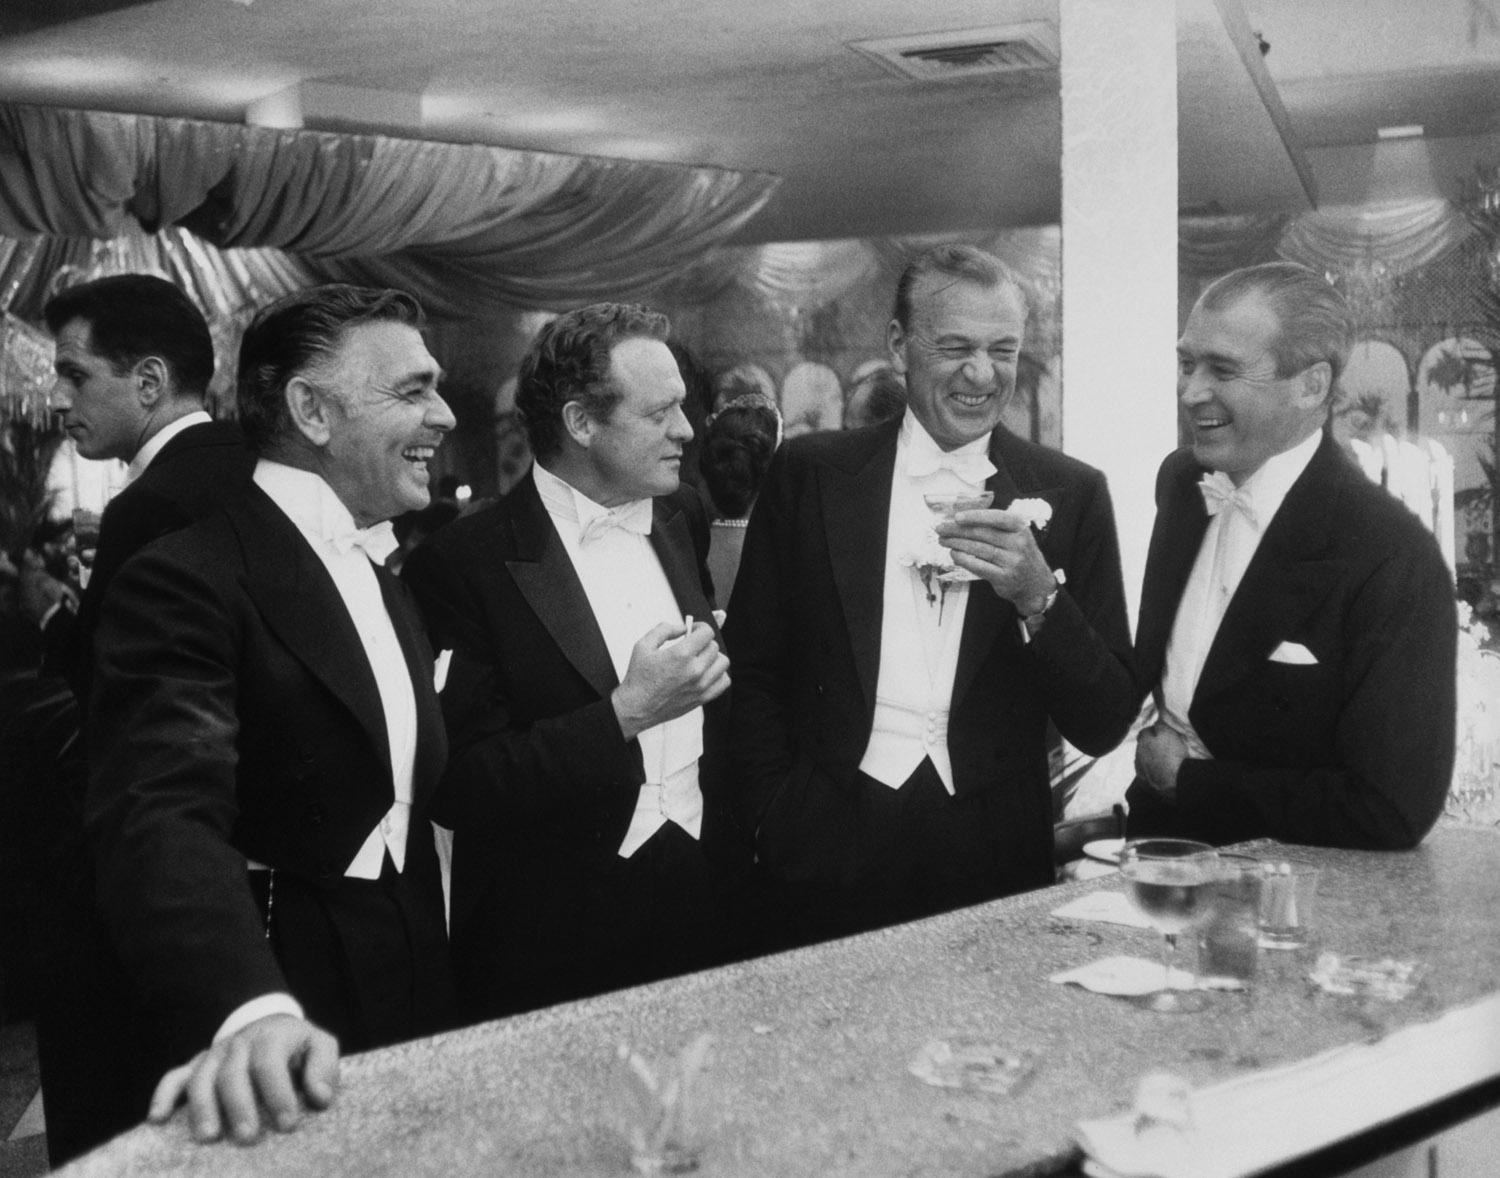 Kings Of Hollywood 1957 
Slim Aarons Limited Estate Edition 

Clark Gable (1901 – 1960), Van Heflin (1910 – 1971), Gary Cooper (1901 – 1961) and James Stewart (1908 – 1997) 
enjoying a joke at a New Year’s party held at Romanoff’s in Beverly Hills,